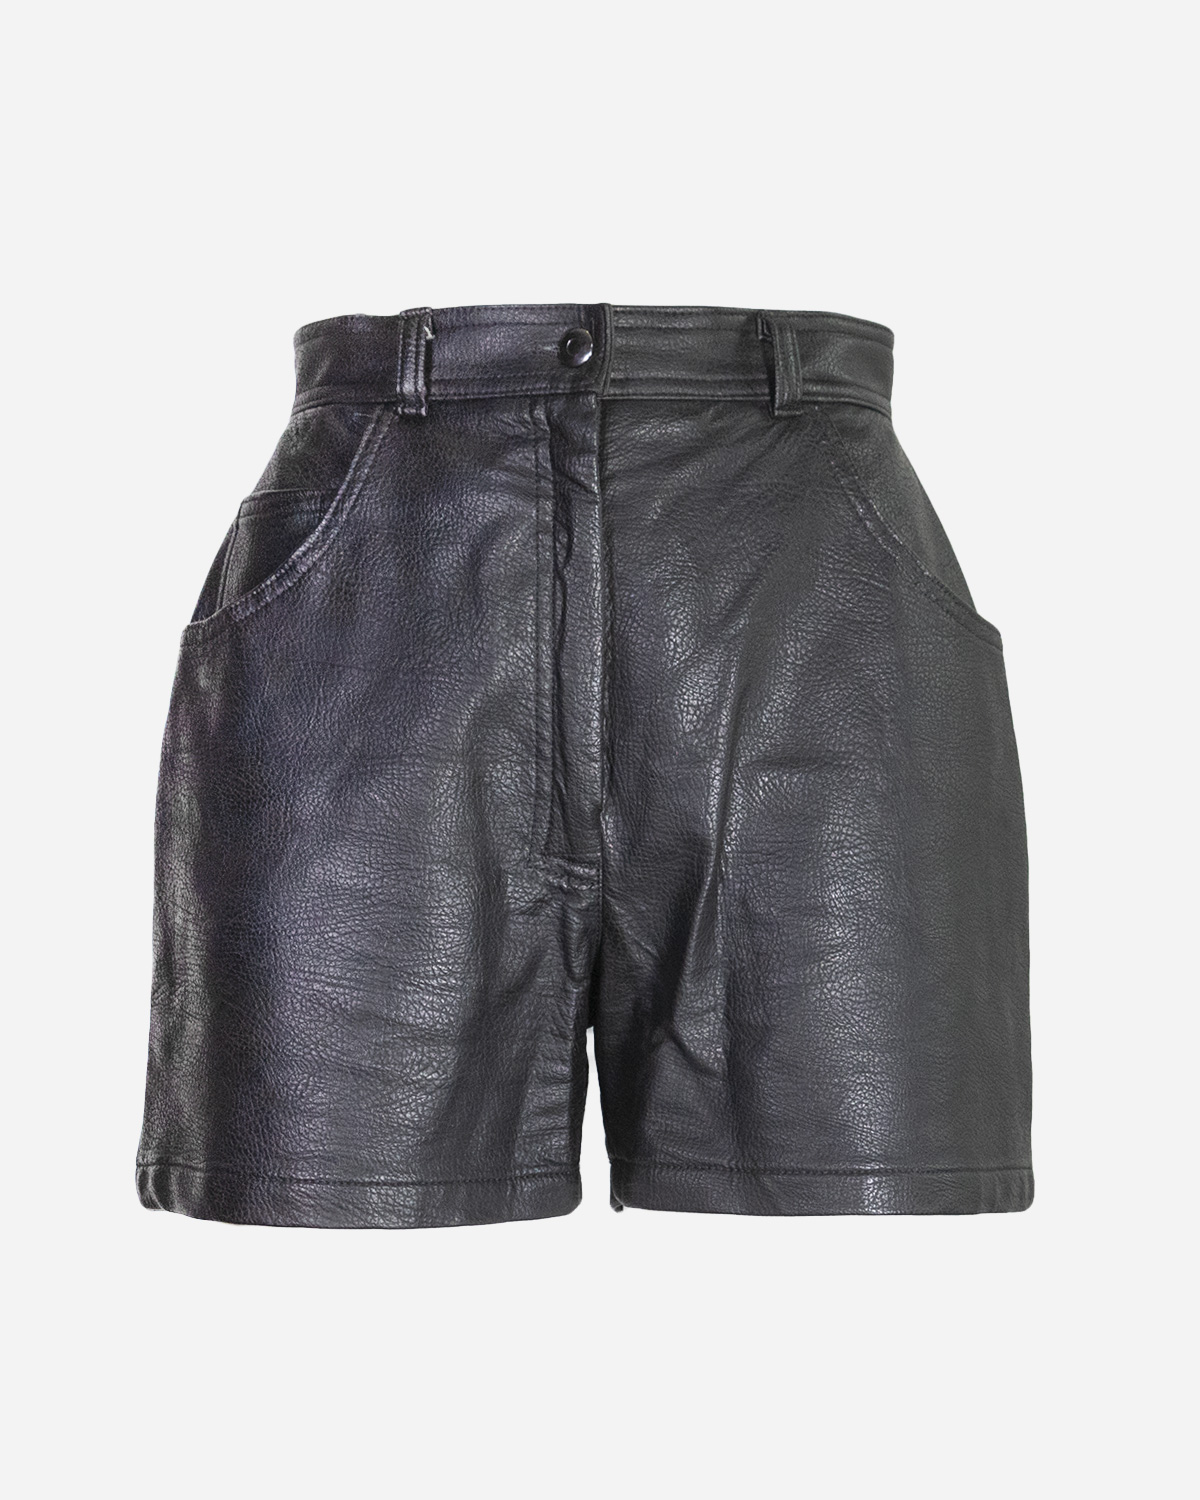 Suede and leather shorts: 4 pieces